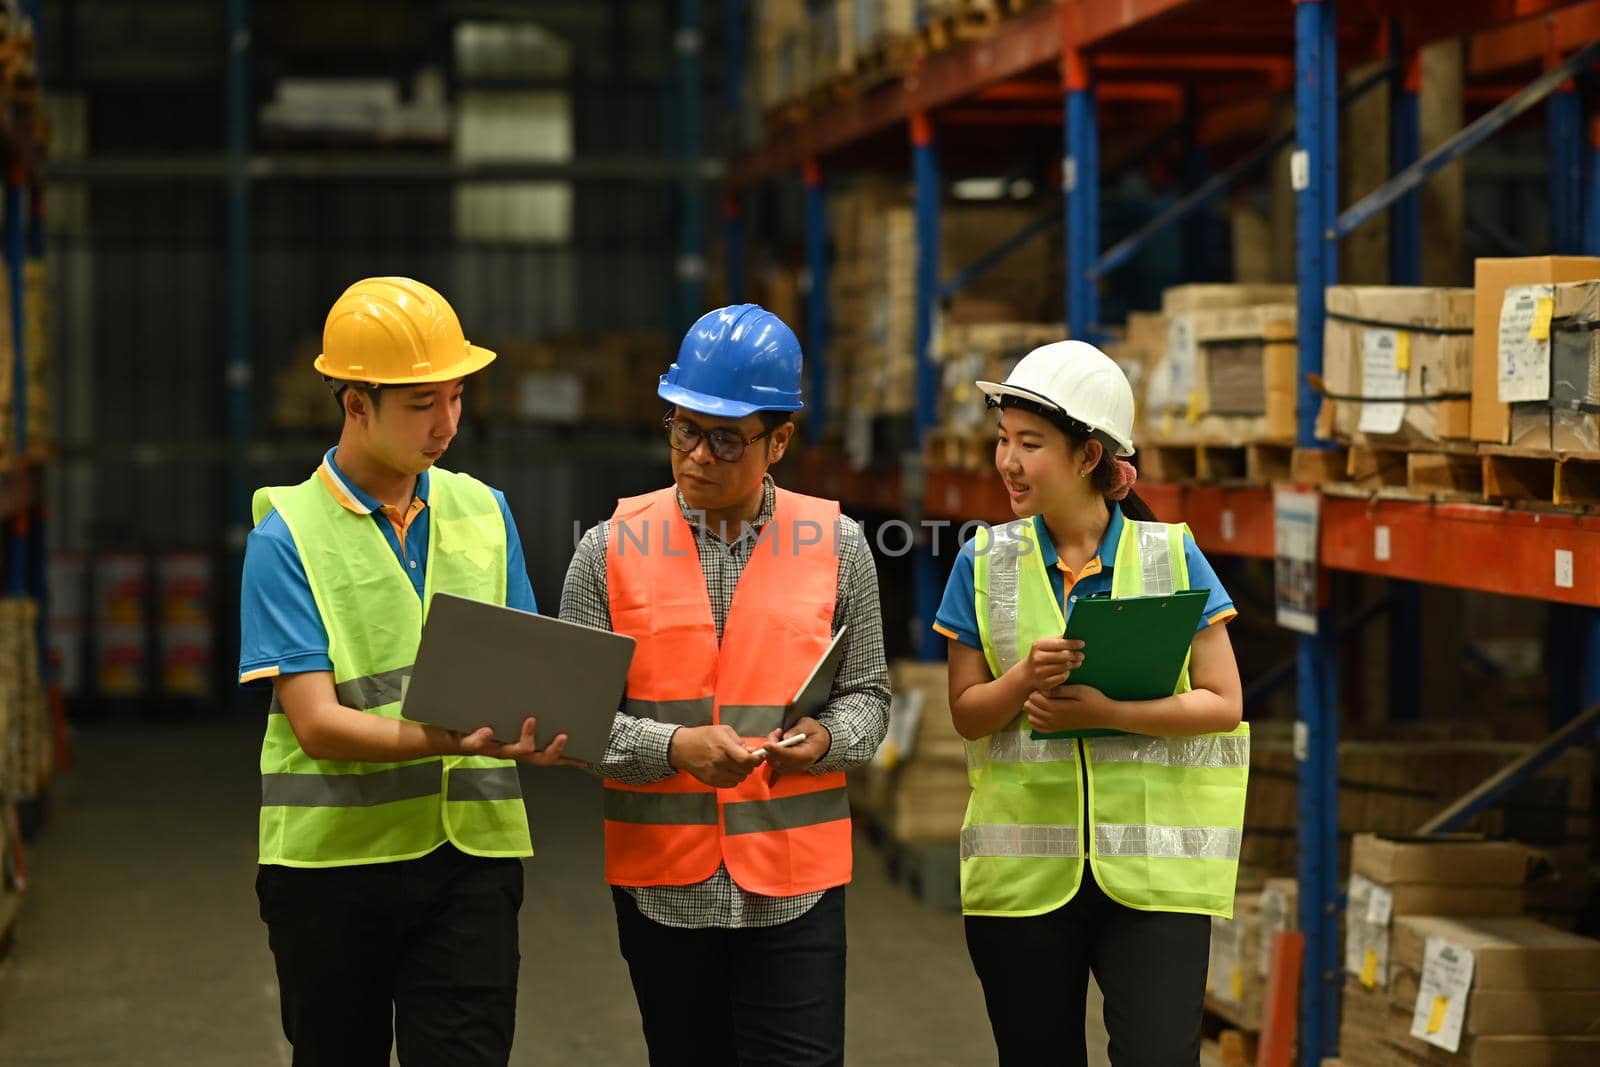 Middle aged manager and young workers inspecting stock and cardboard stock product on laptop computer in a large warehouse by prathanchorruangsak